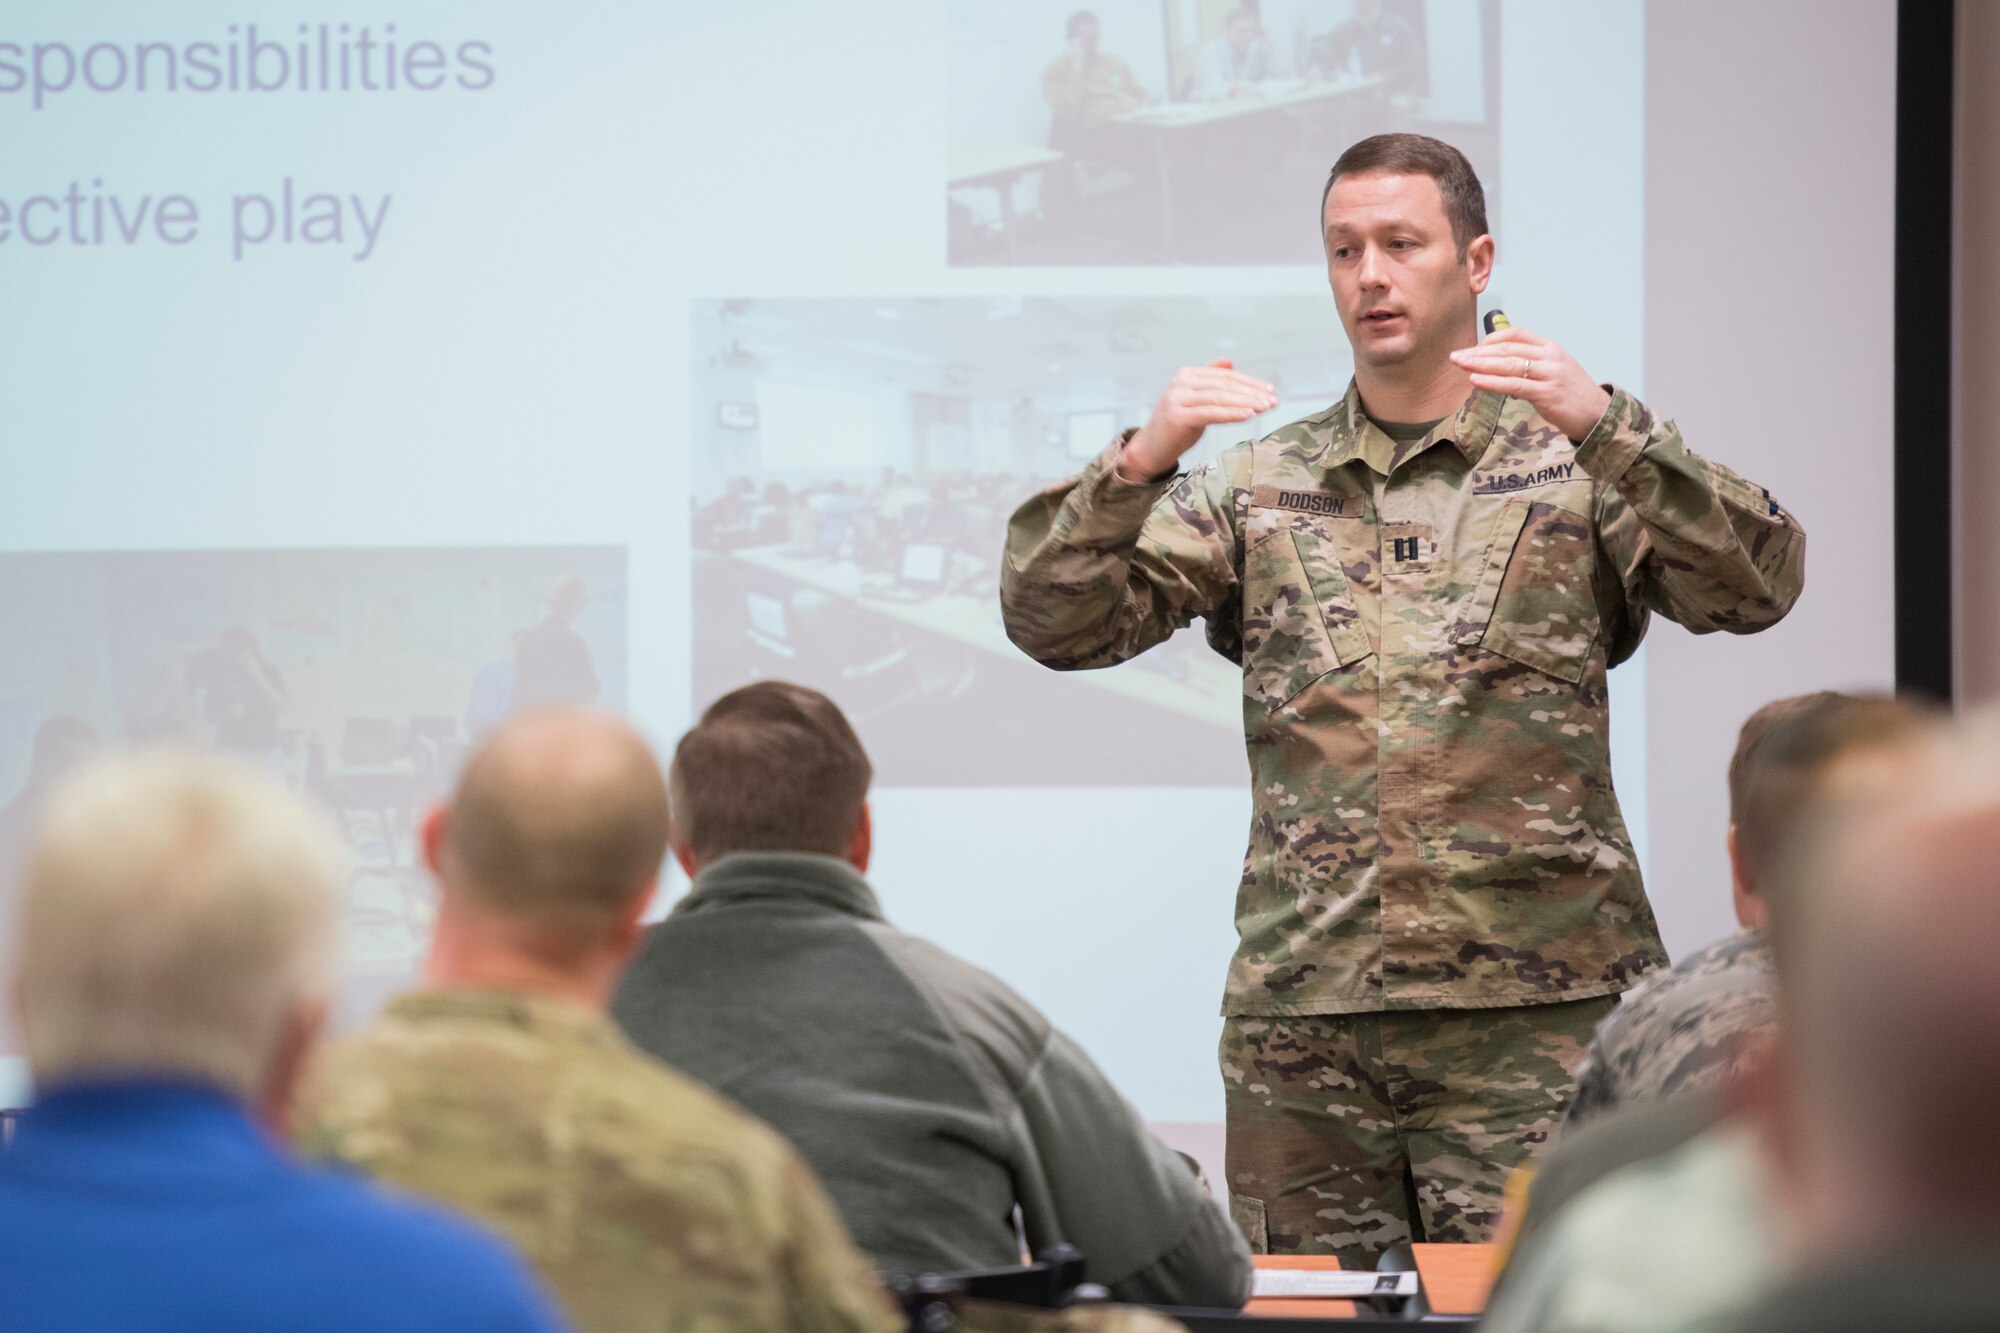 U.S. Army Capt. Joshua Dodson, an operations training officer for the 35th Civil Support Team, West Virgninia National Guard,  leads a discussion during a Homeland Secuirty Exercise and Evaluation Program course held at the 167th Airlift Wing, March 28, 2019. (U.S. Air National Guard  photo by Senior Master Sgt. Emily Beightol-Deyerle)